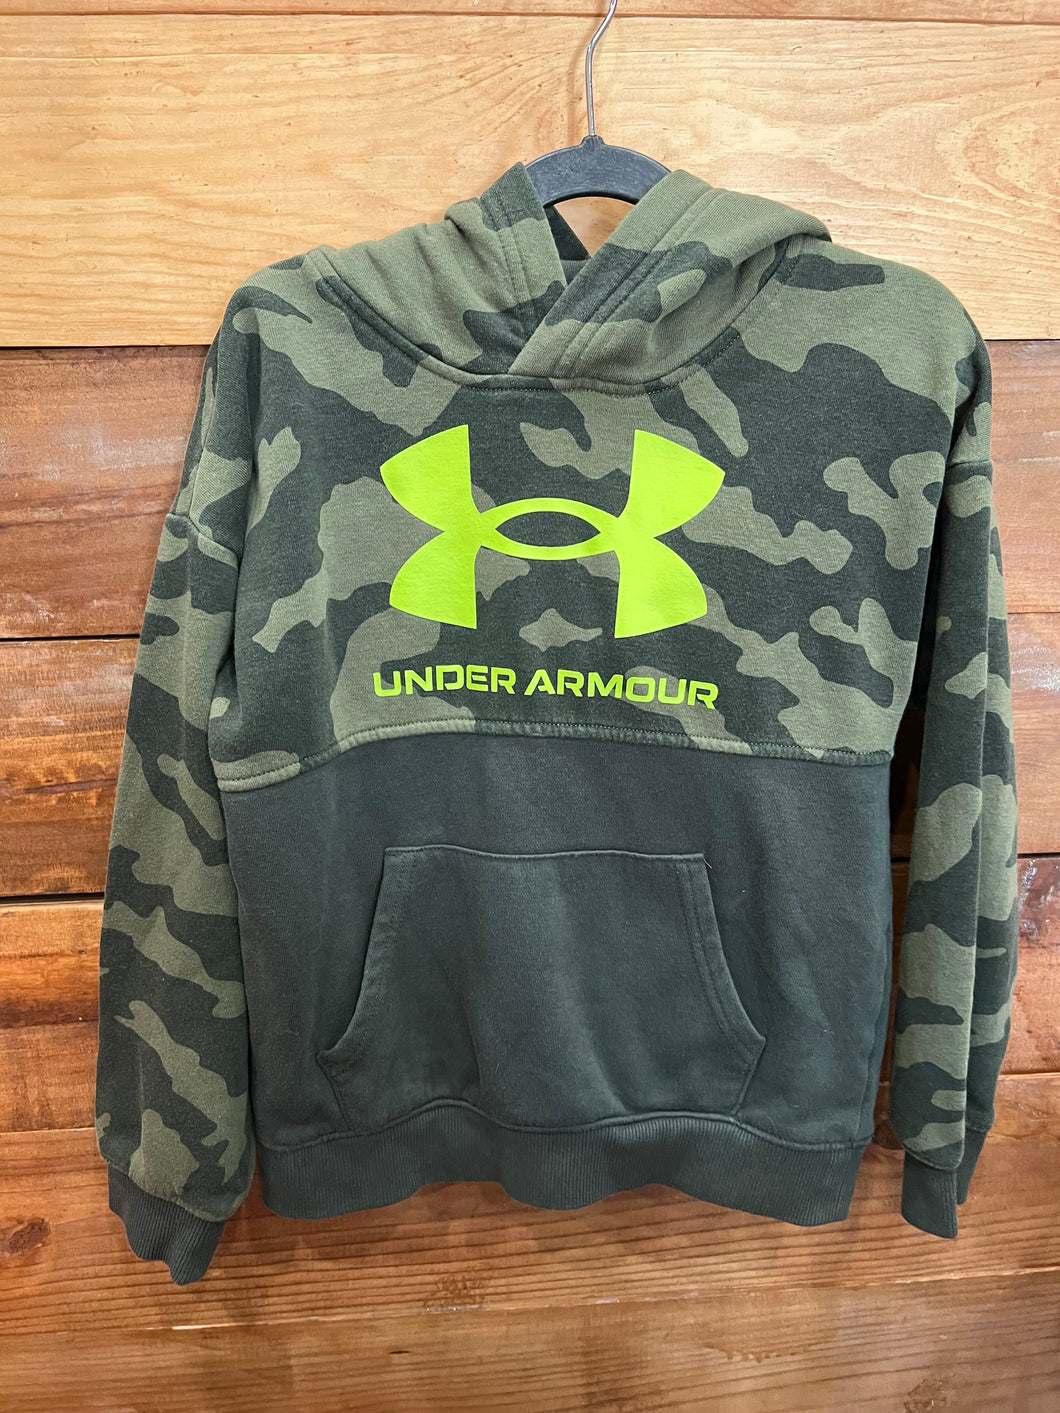 Under Armour Green Camo Hoodie Size 7